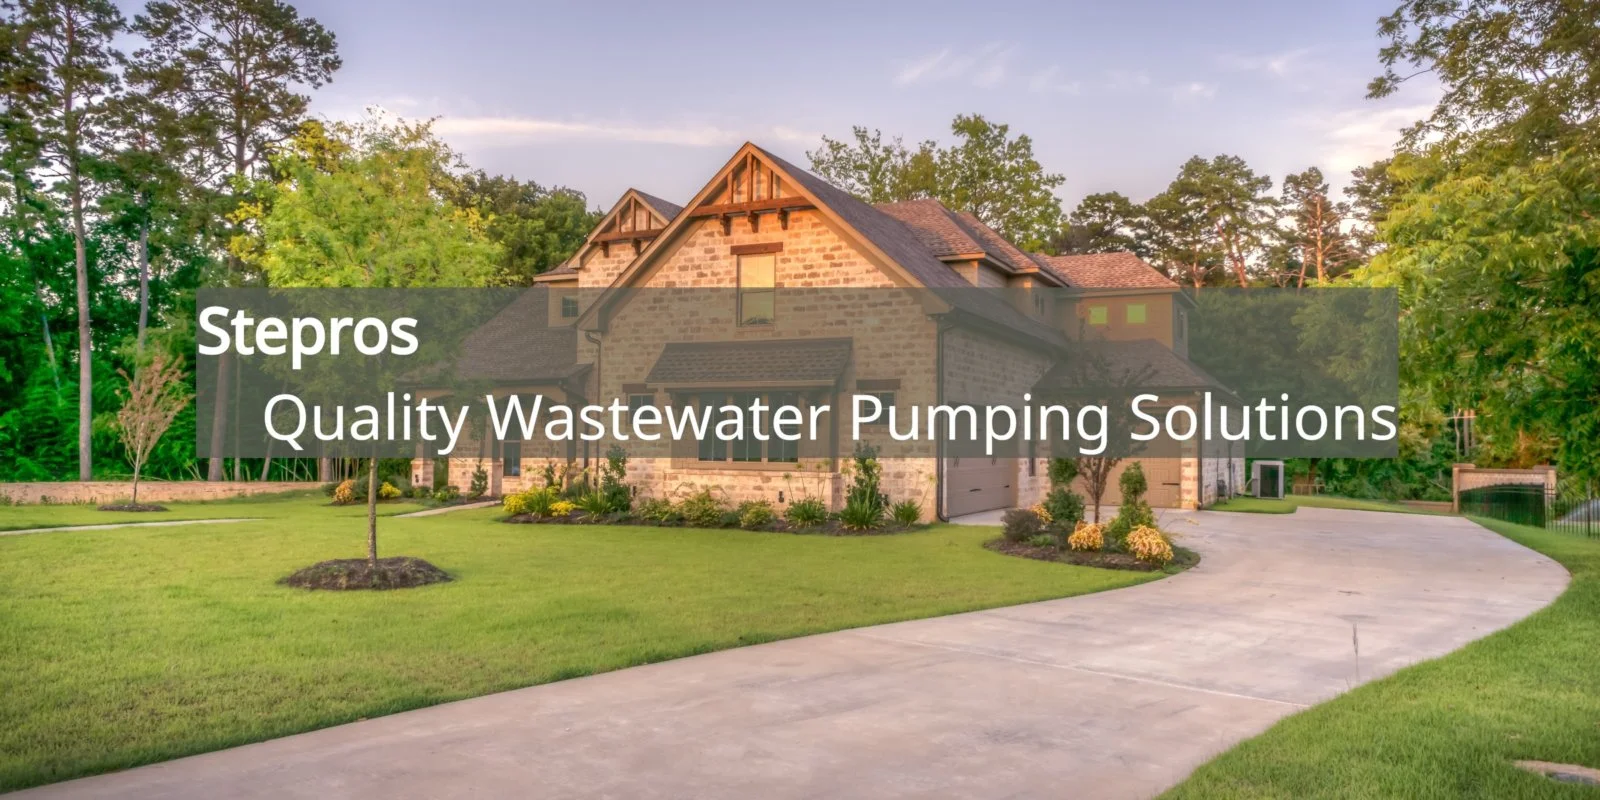 A residential home with the text "Stepros: Quality Wastewater Pumping Solutions"